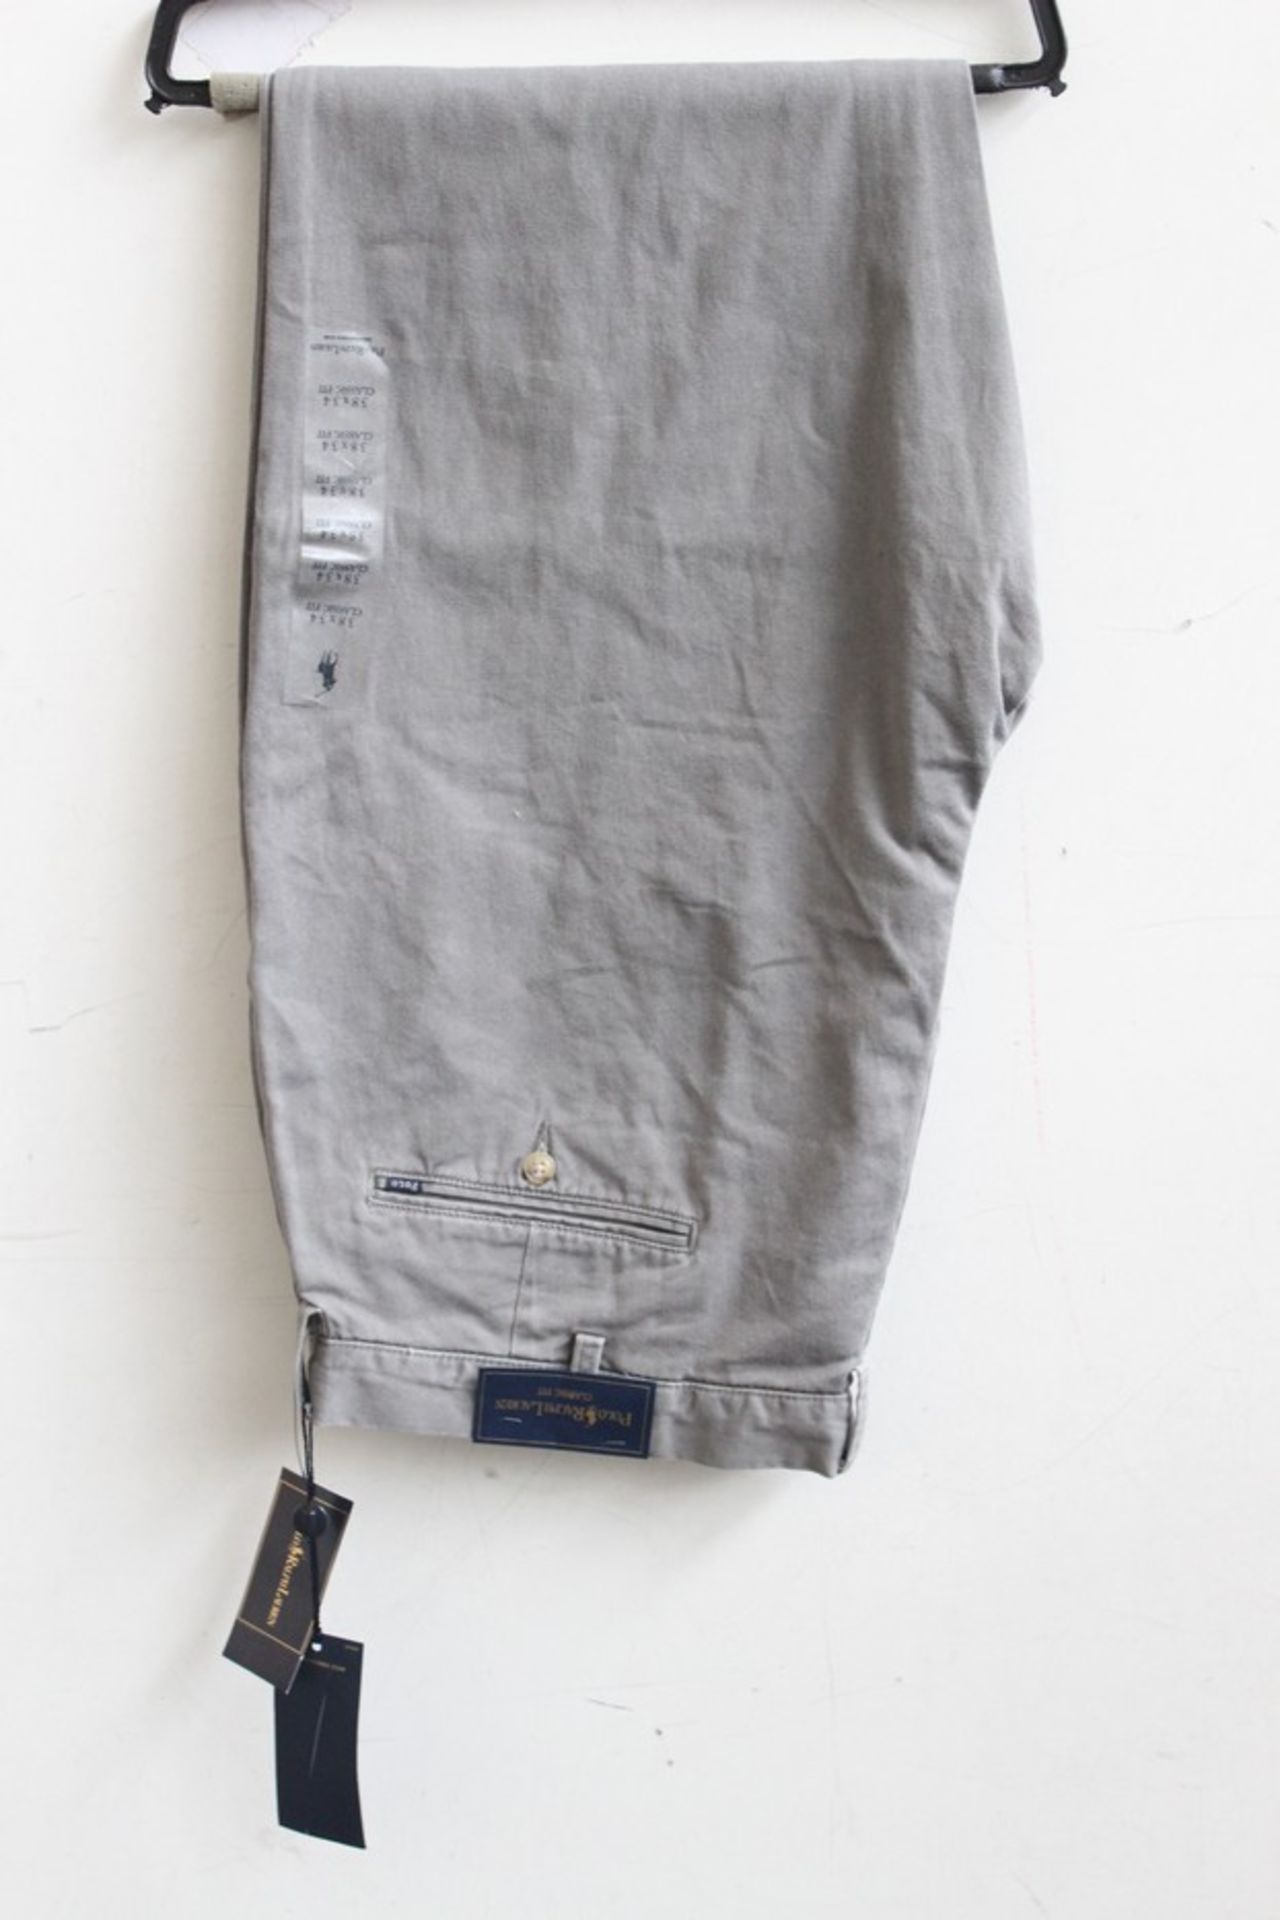 ONE BRAND NEW PAIR OF RALPH LAUREN GREENWICH CHINOS IN REAGAN GREY SIZE 38/34 RRP £100 (DS RES